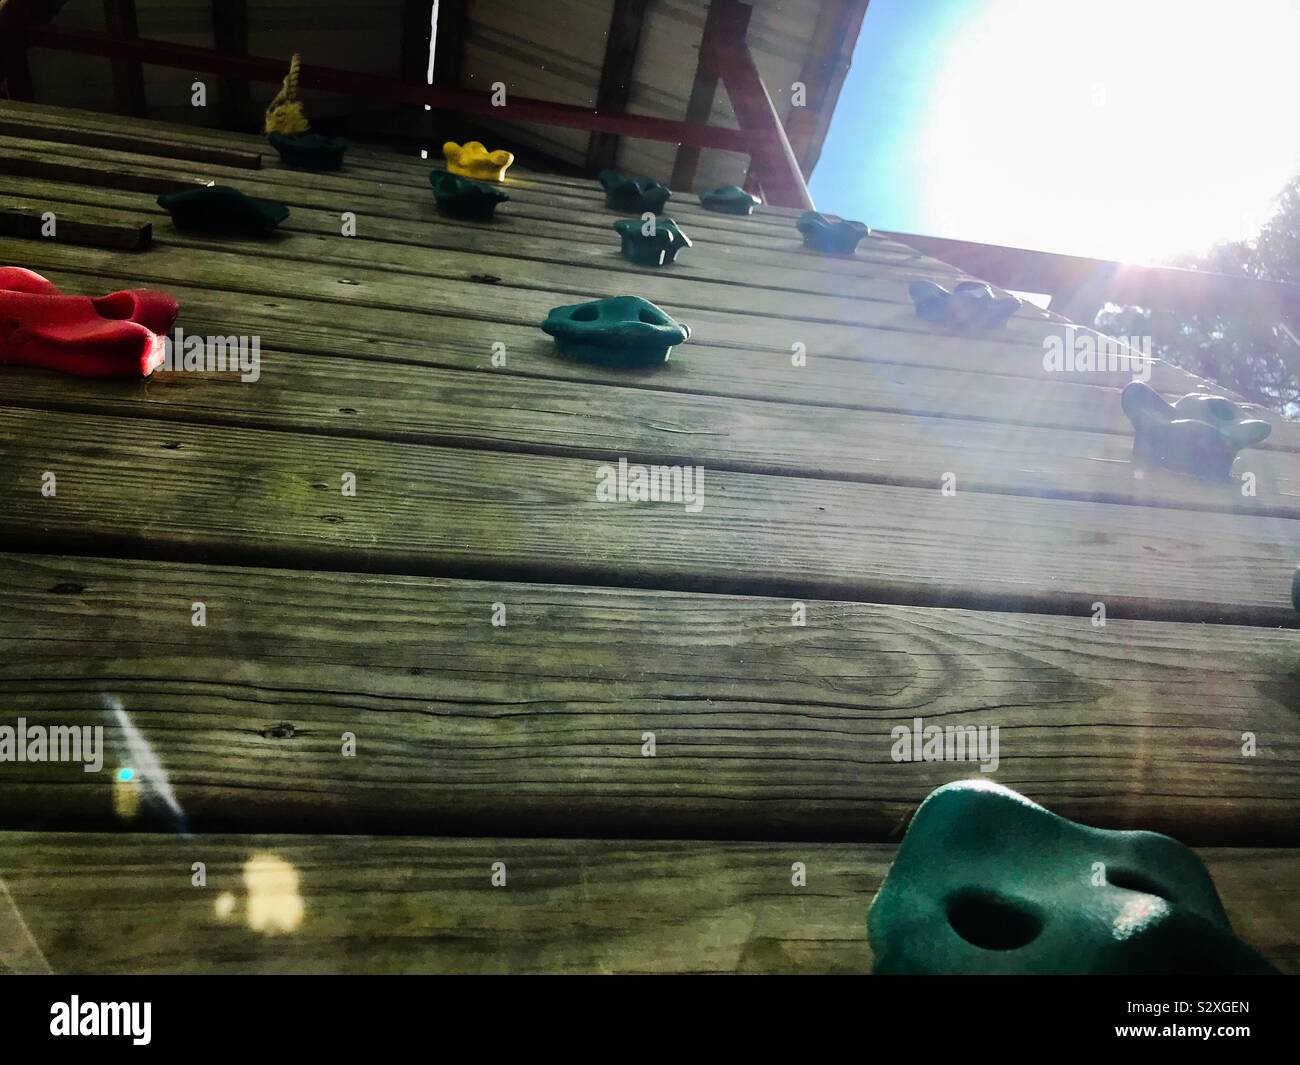 Sunlight and a view up the climbing wall at playground Stock Photo